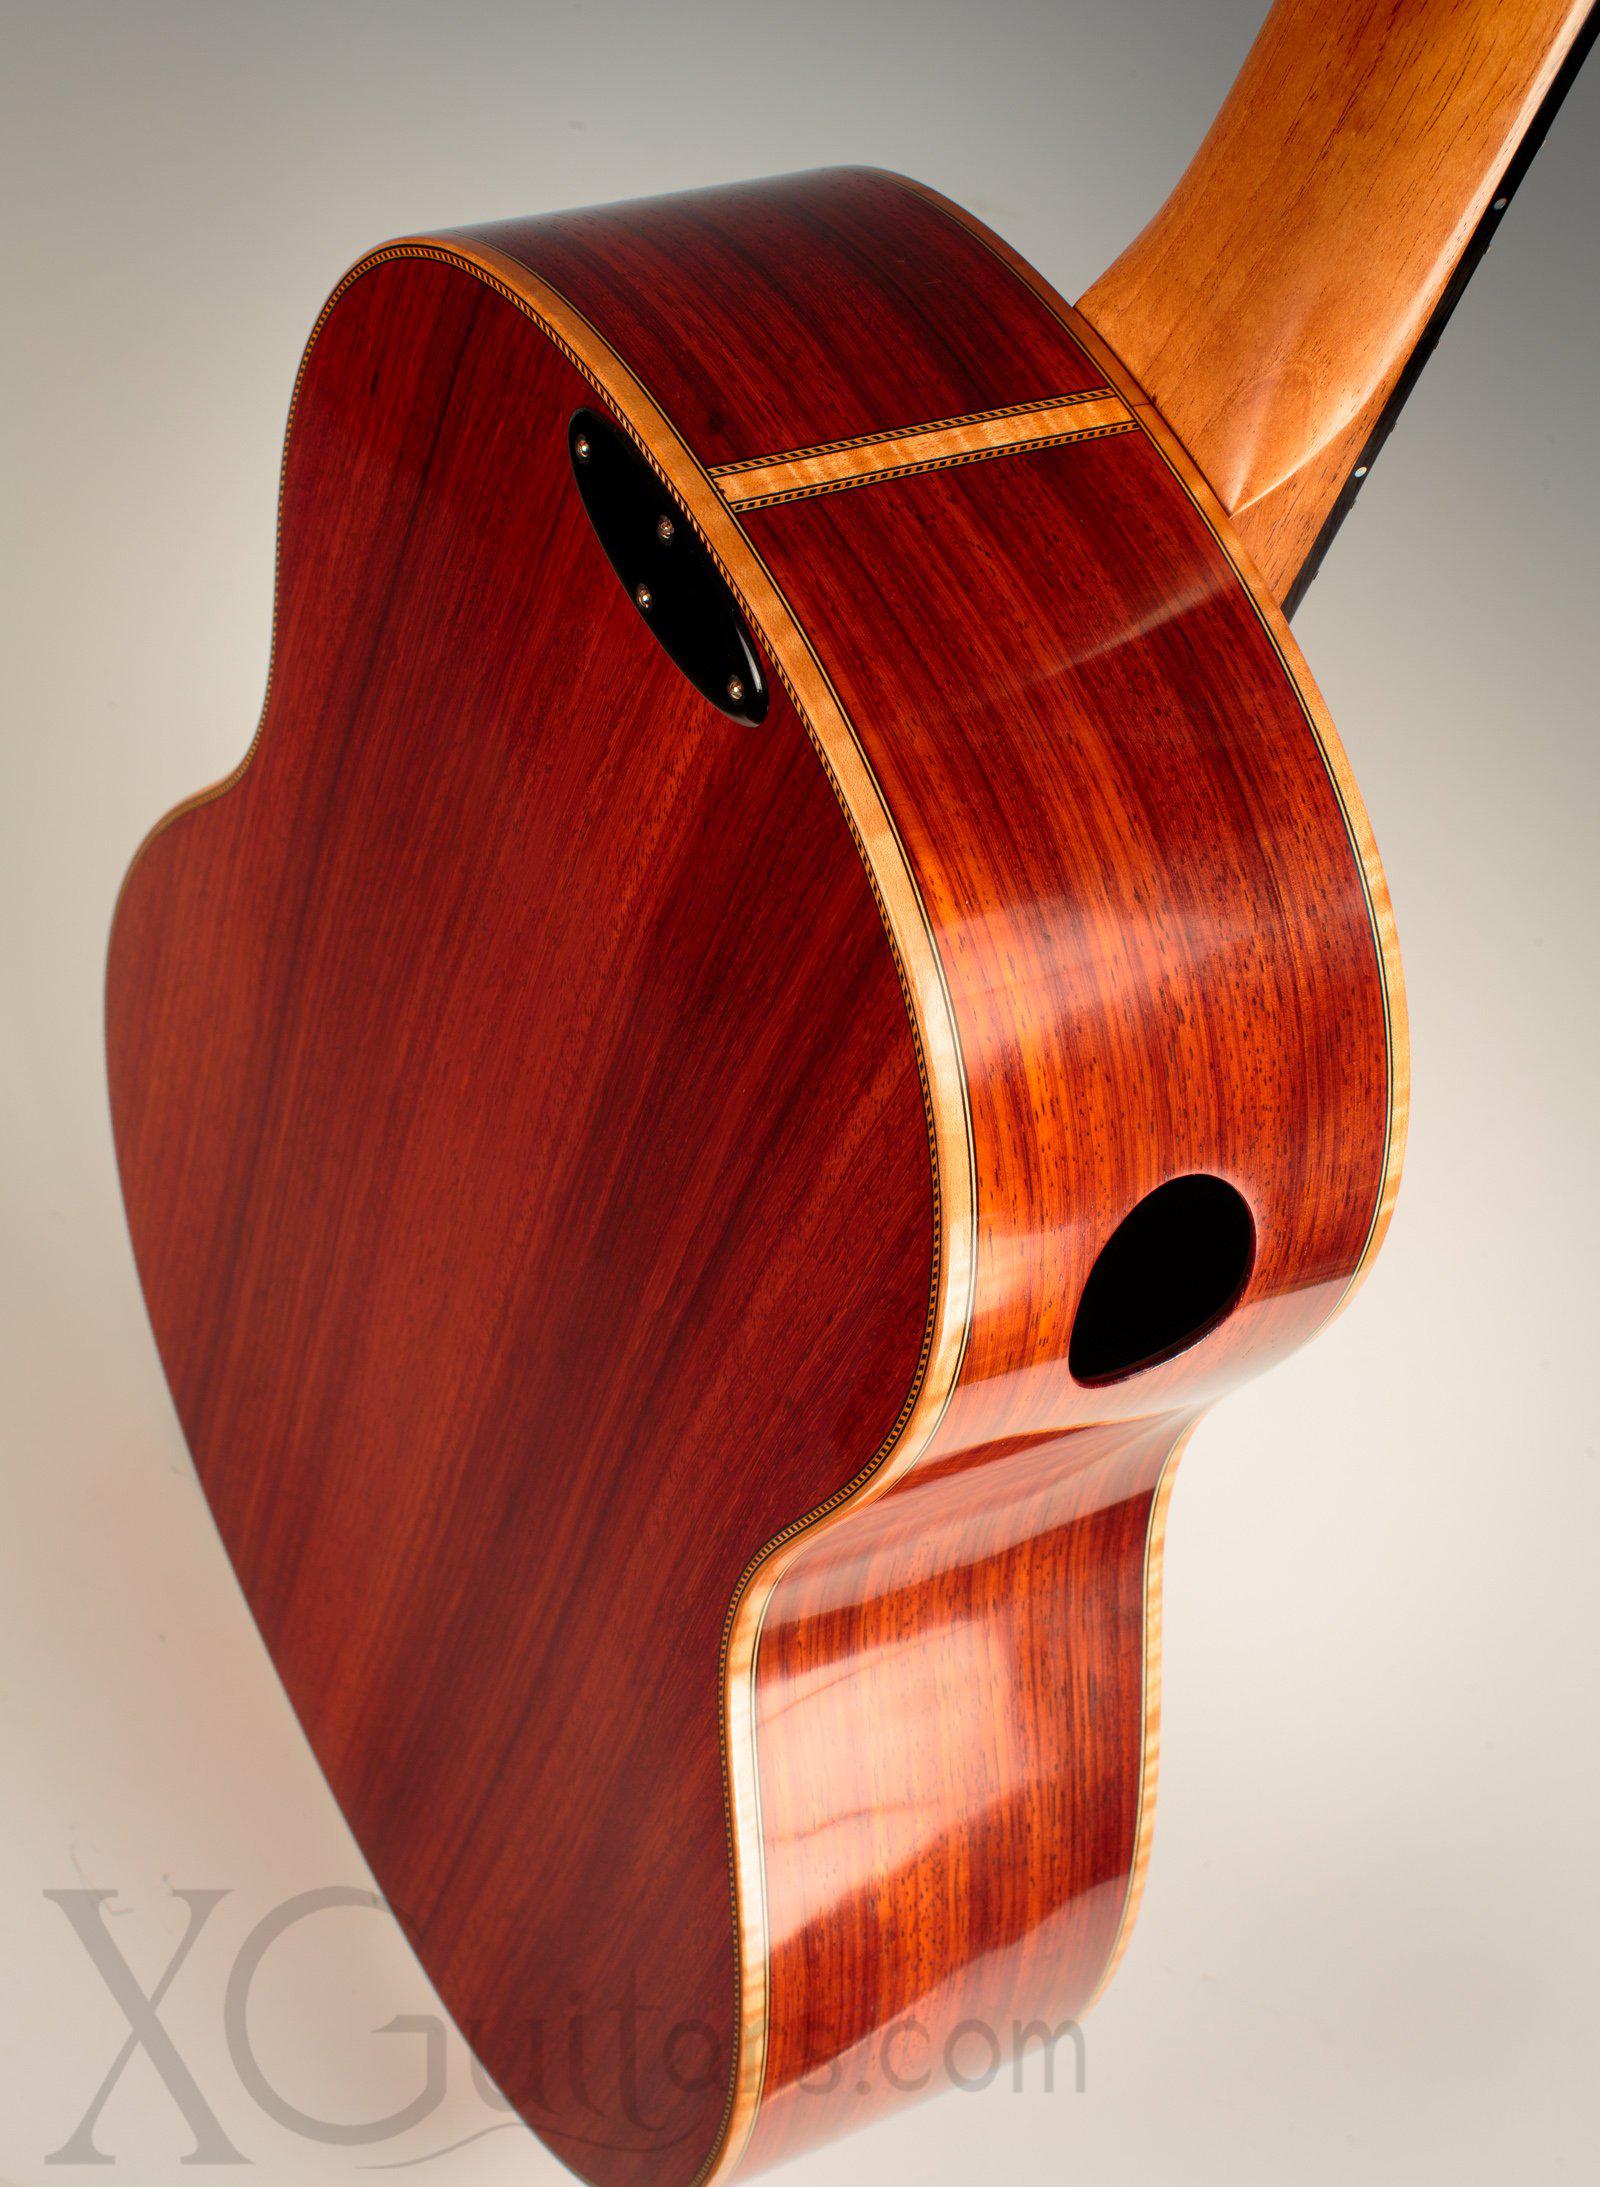 Tony Ennis Classical Guitar 2019 - Redwood Top - Silver Tuners